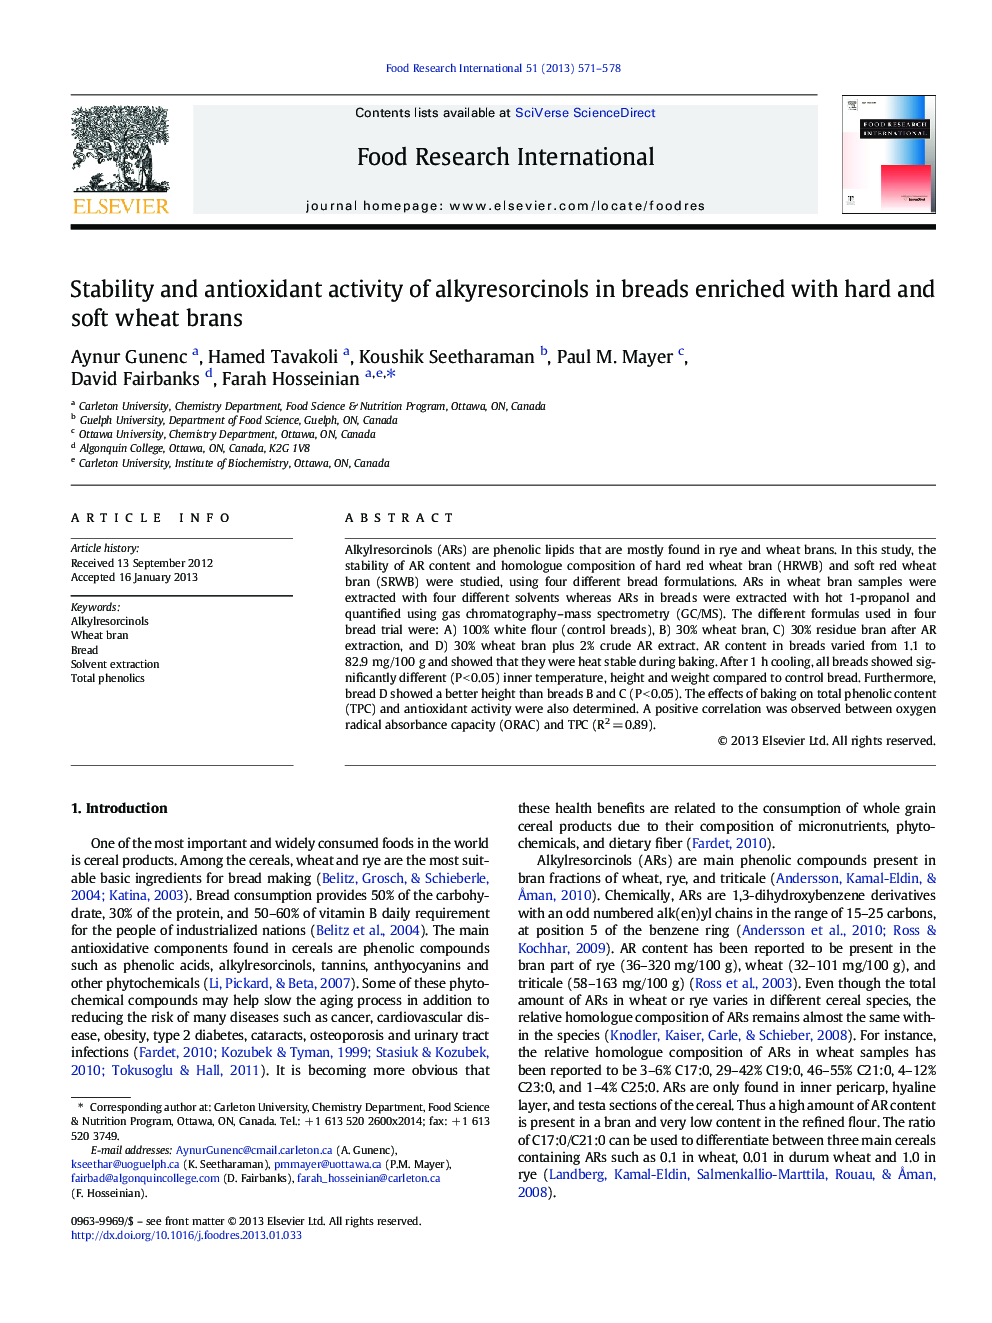 Stability and antioxidant activity of alkyresorcinols in breads enriched with hard and soft wheat brans